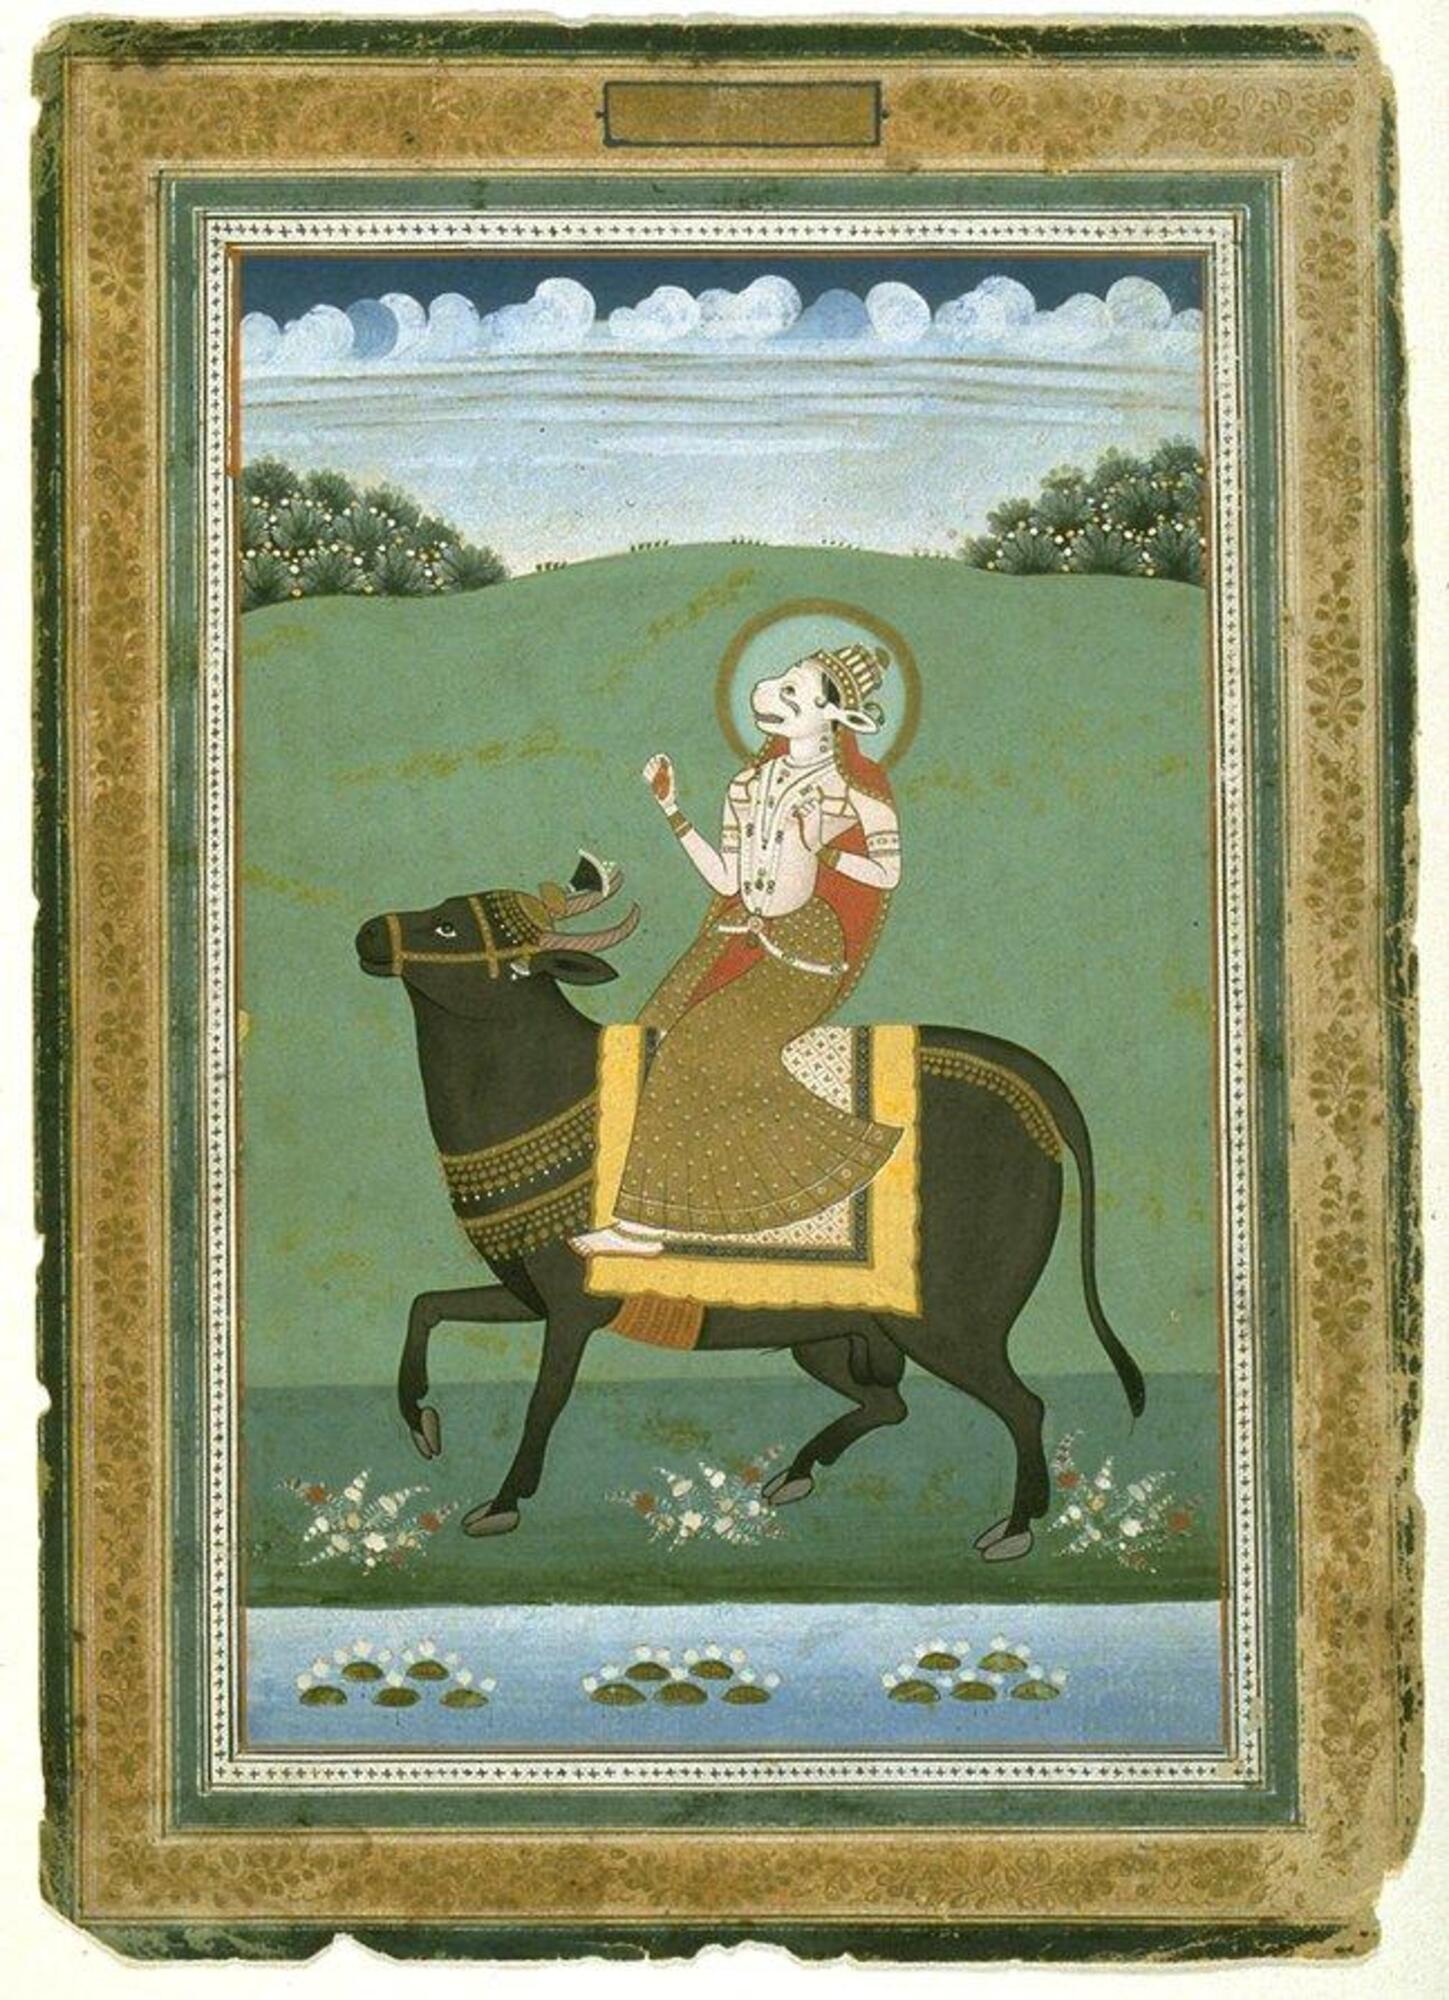 Two figures, Anjana and a bull are depicted centrally in the image. The background is very simple with some grass tufts and a pond near the very bottom of the images. Near the top of the image in the background there some trees and sky are visible.